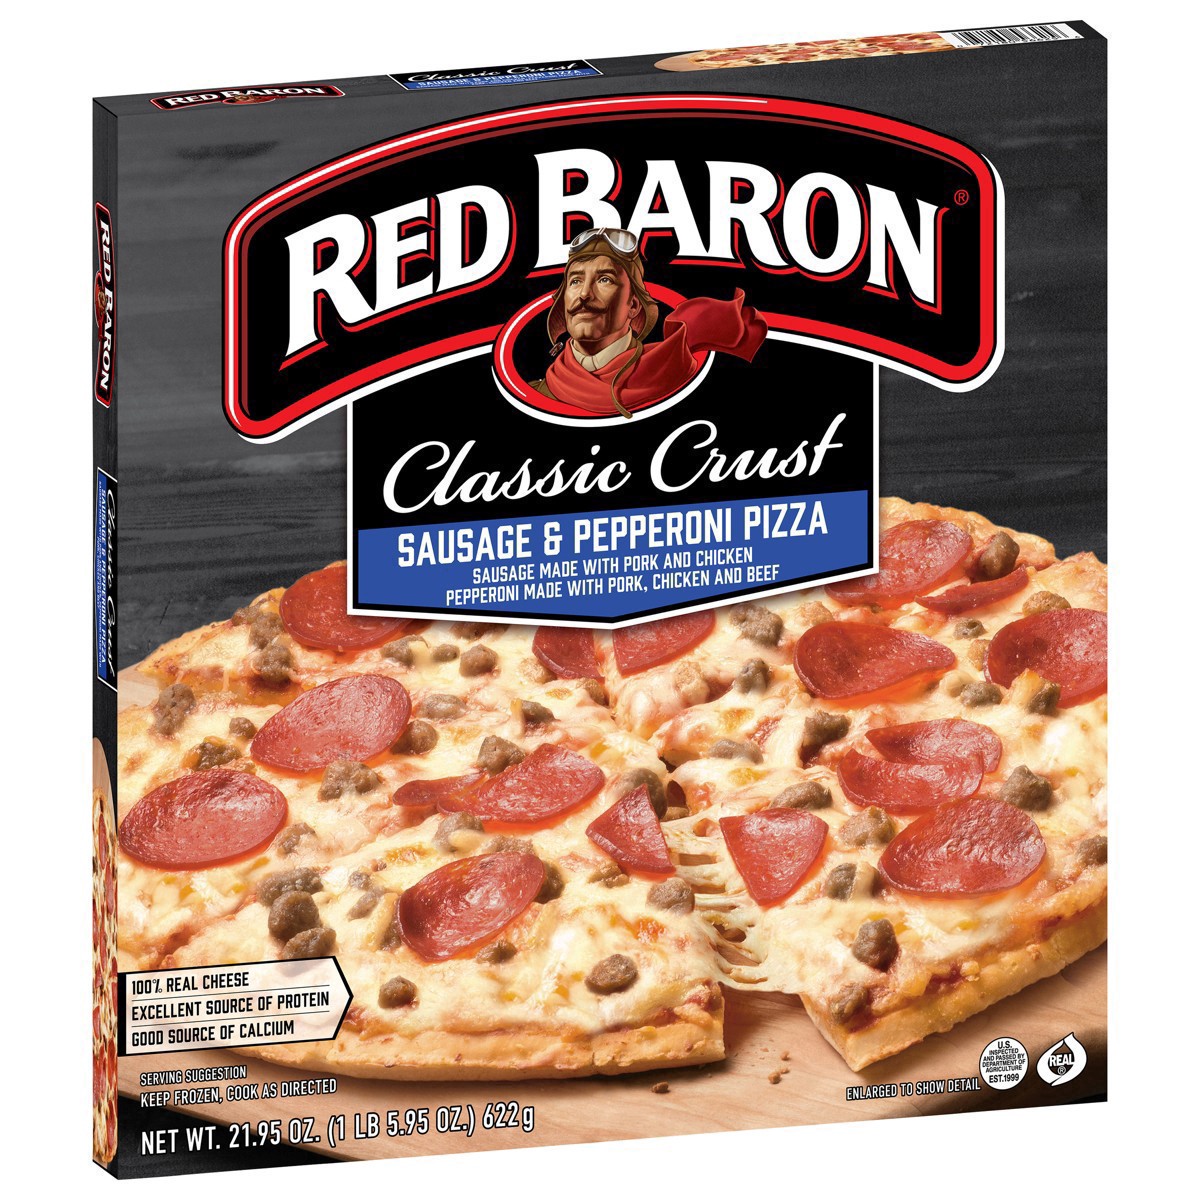 slide 18 of 49, Red Baron Frozen Pizza Classic Crust Sausage & Pepperoni, 21.95 oz